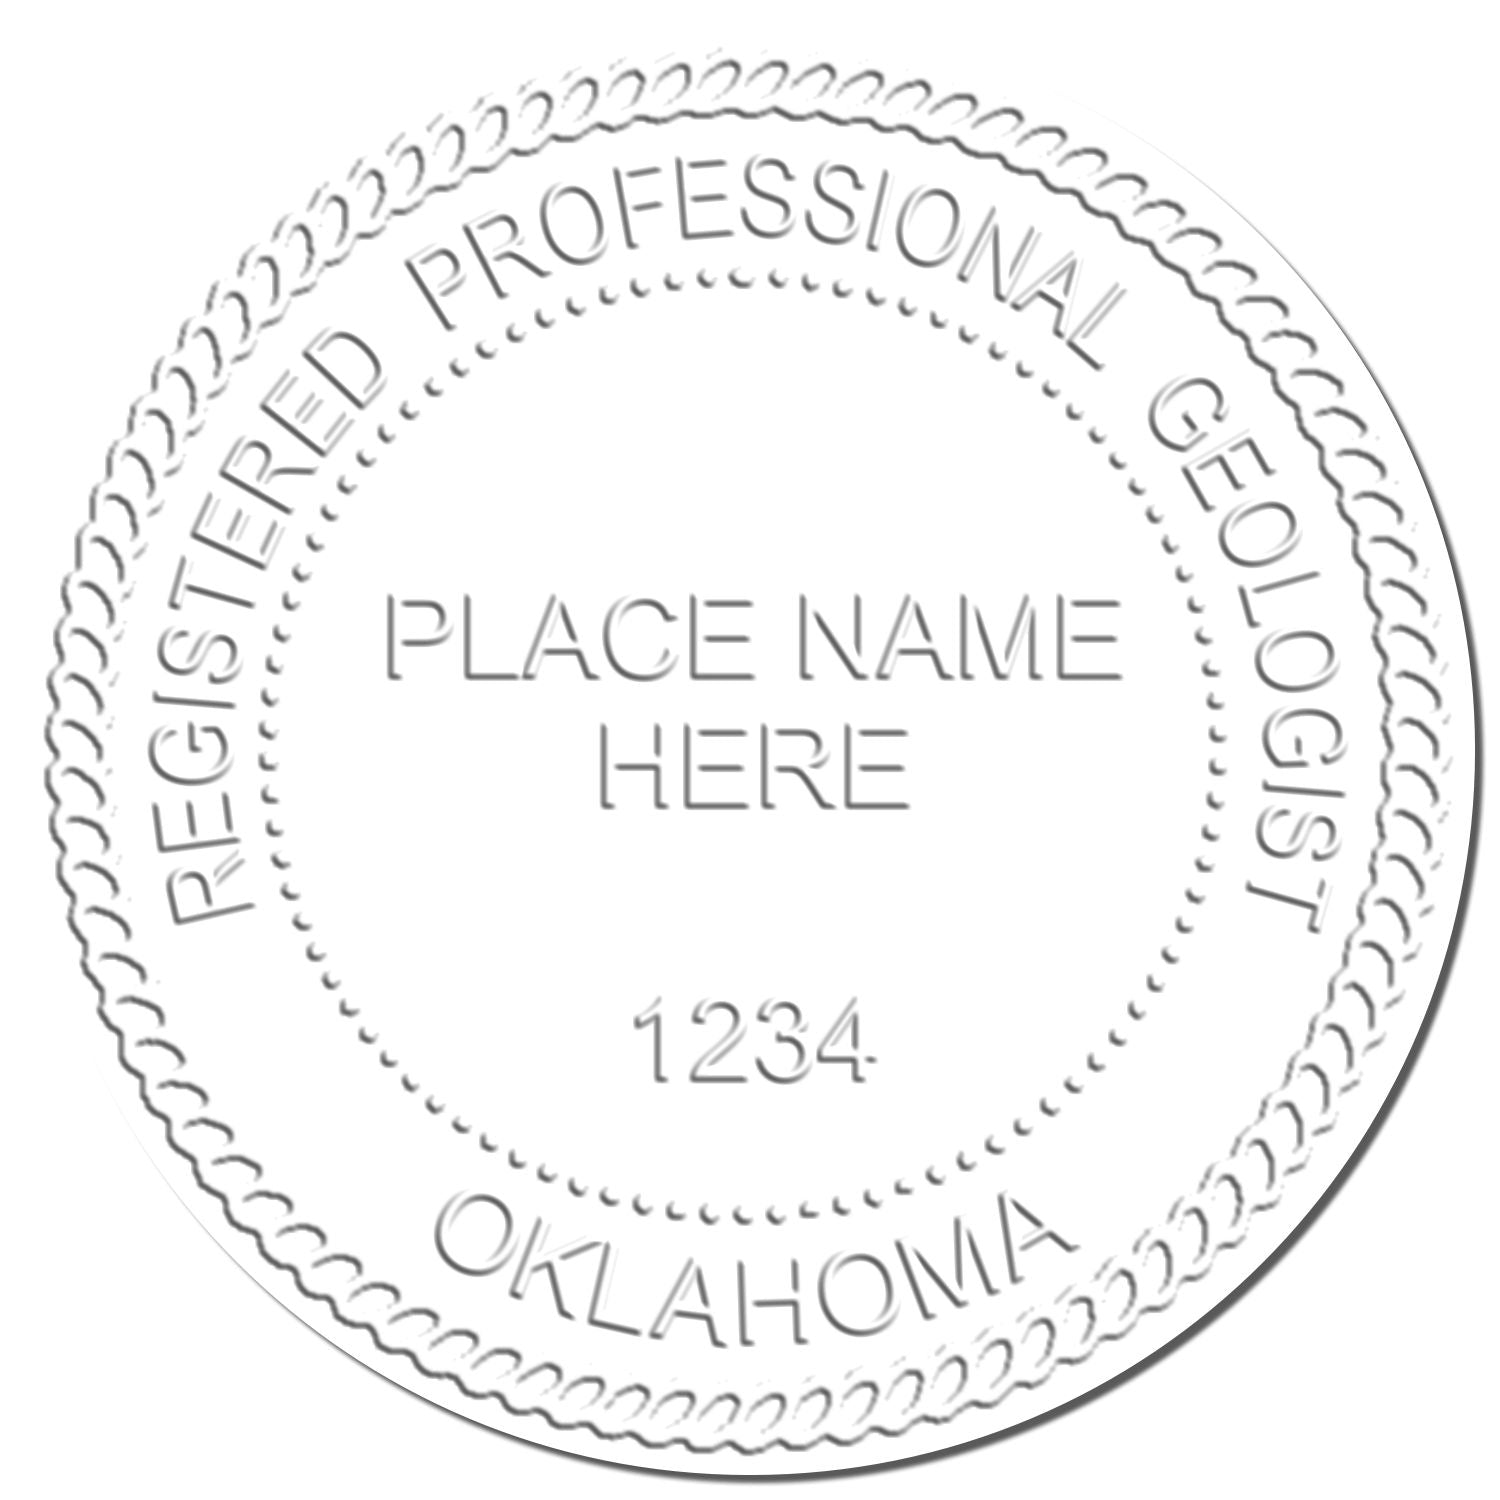 The Oklahoma Geologist Desk Seal stamp impression comes to life with a crisp, detailed image stamped on paper - showcasing true professional quality.